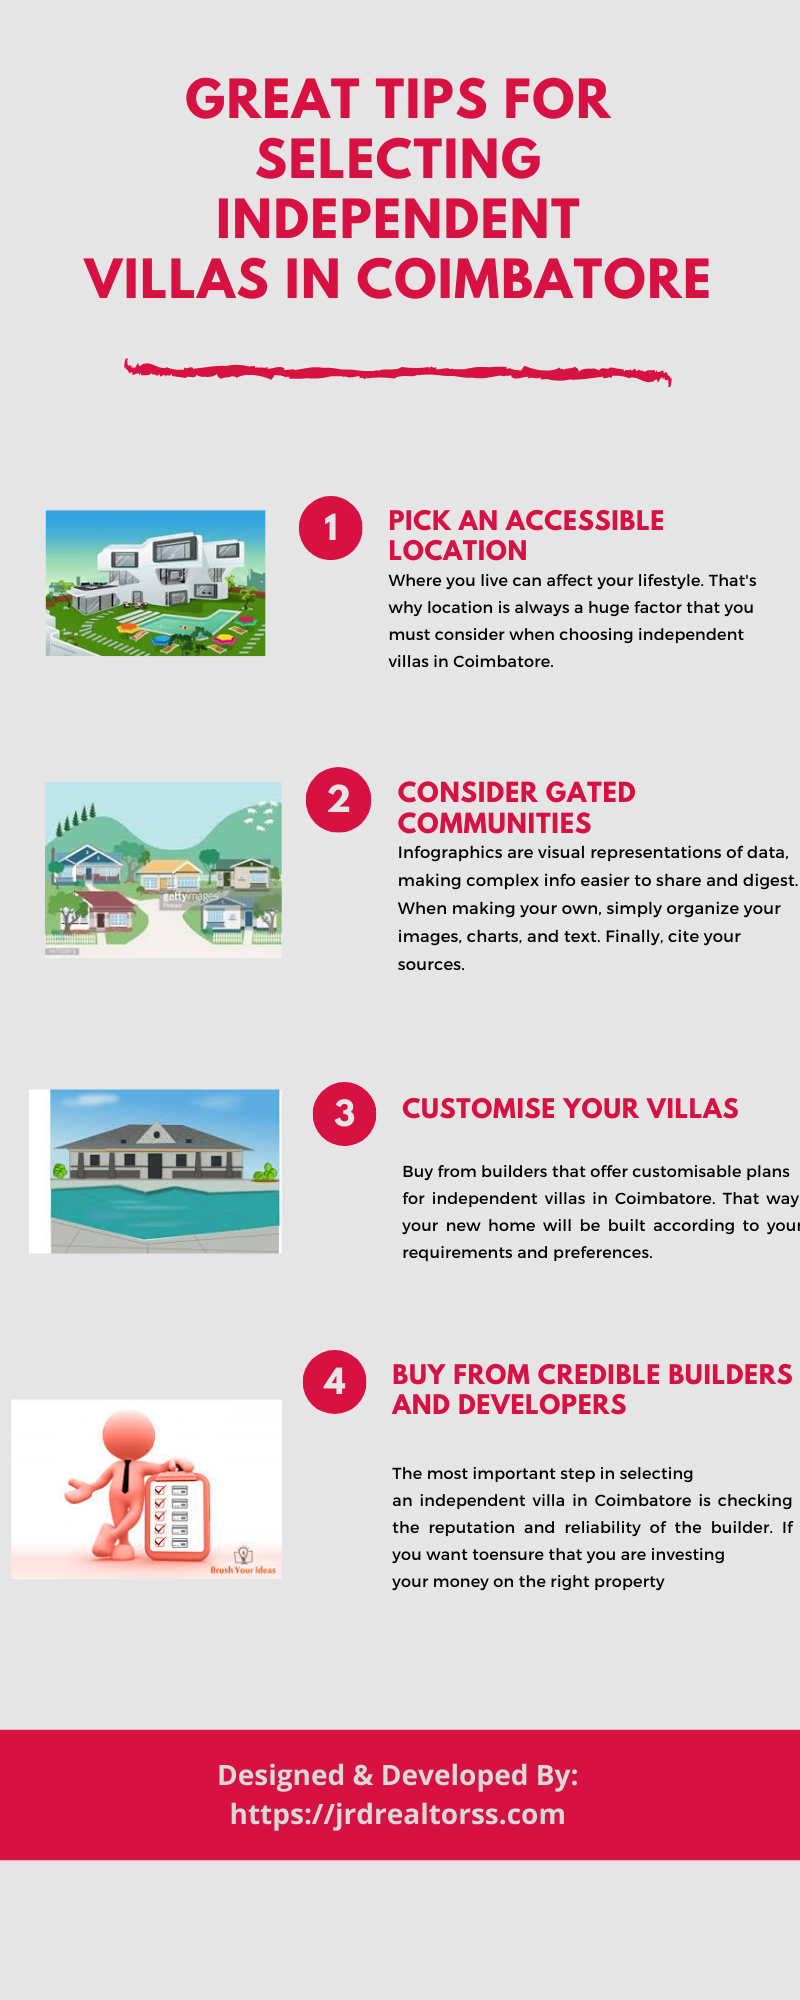 Great Tips for Selecting Independent Villas in Coimbatore.png  by Jrdrealtorss